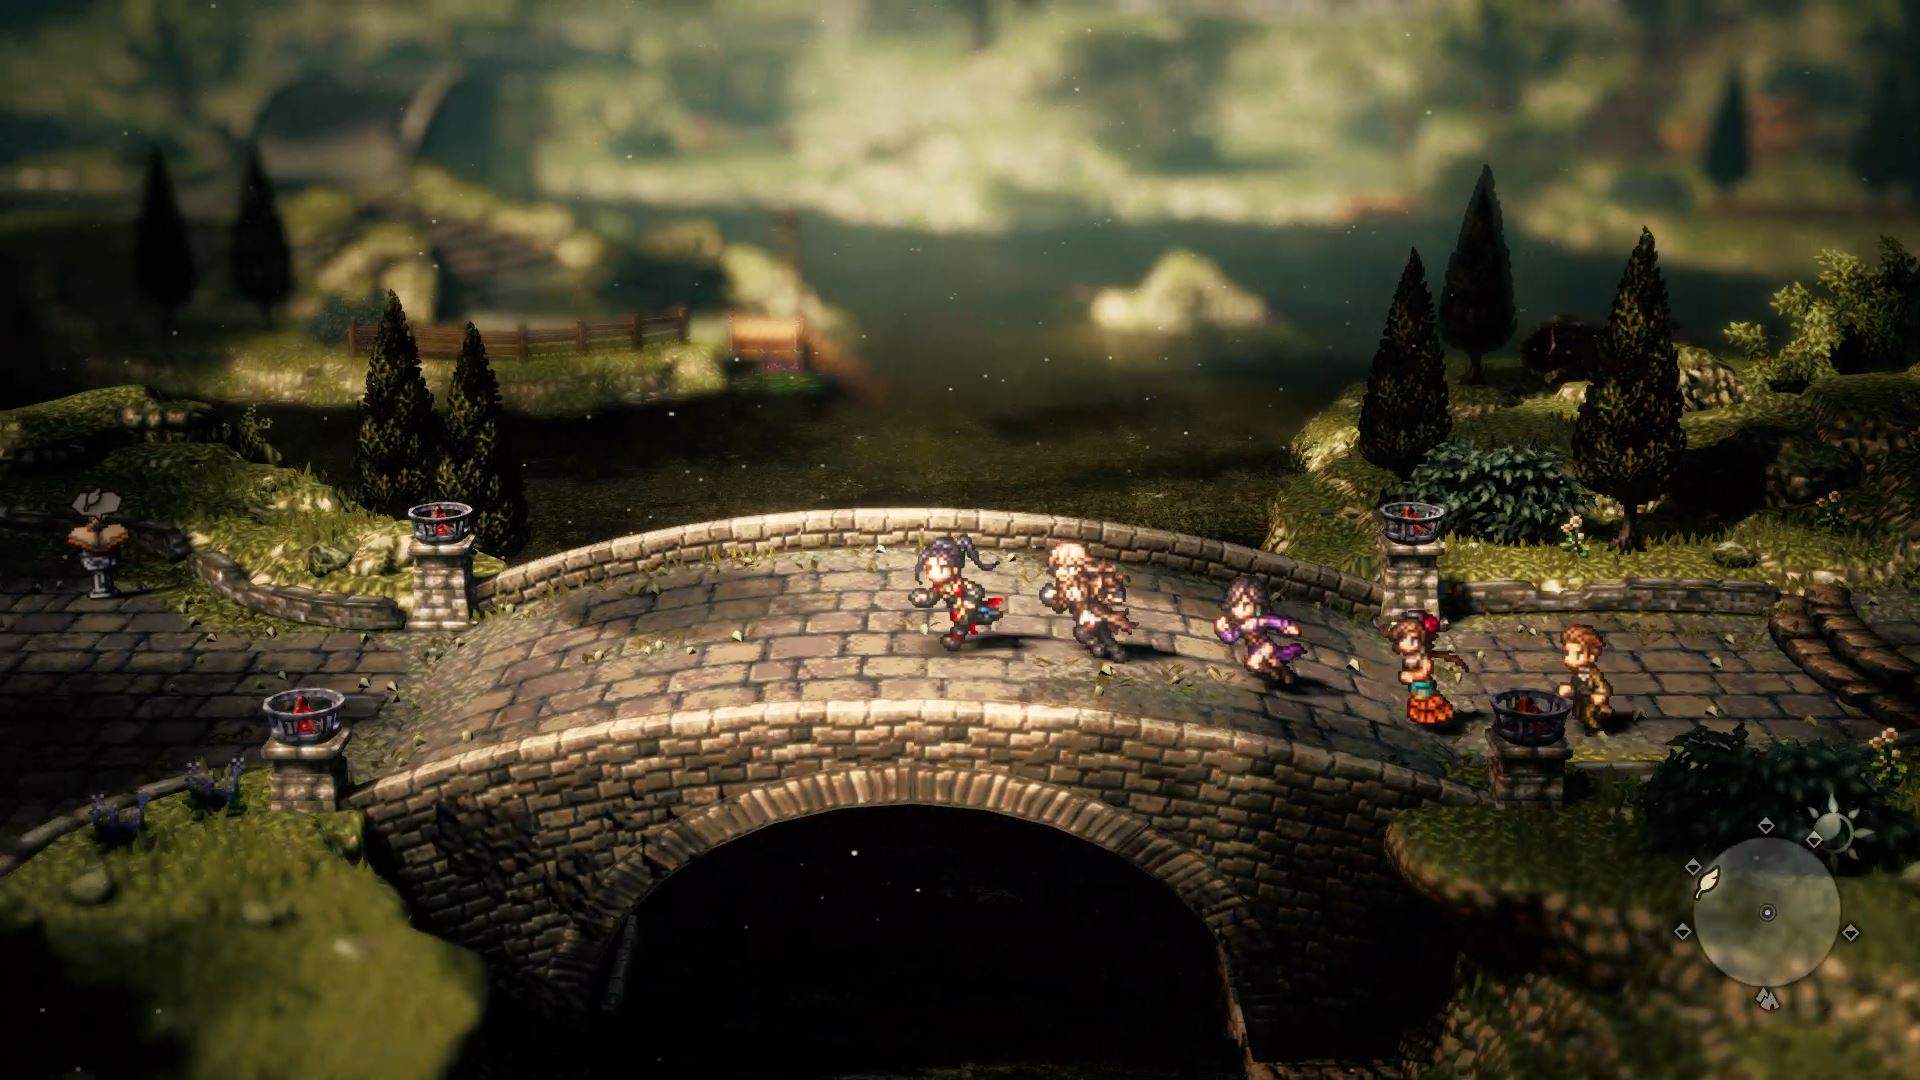 Octopath Traveler shows how Nintendo Switch could be a JRPG beast